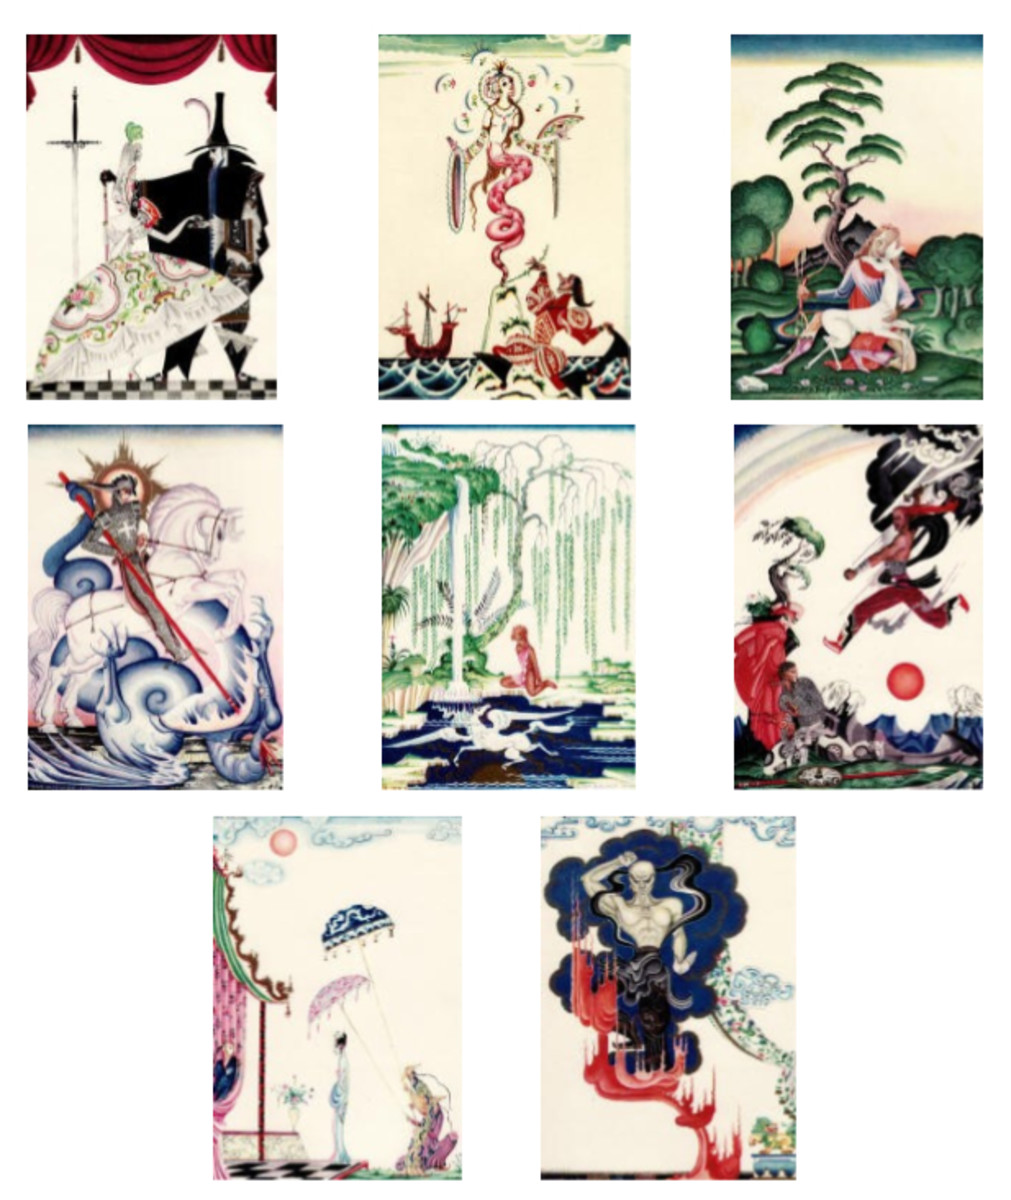 Here we show each of the full-color designs by Kay Nielsen from the suite published in 